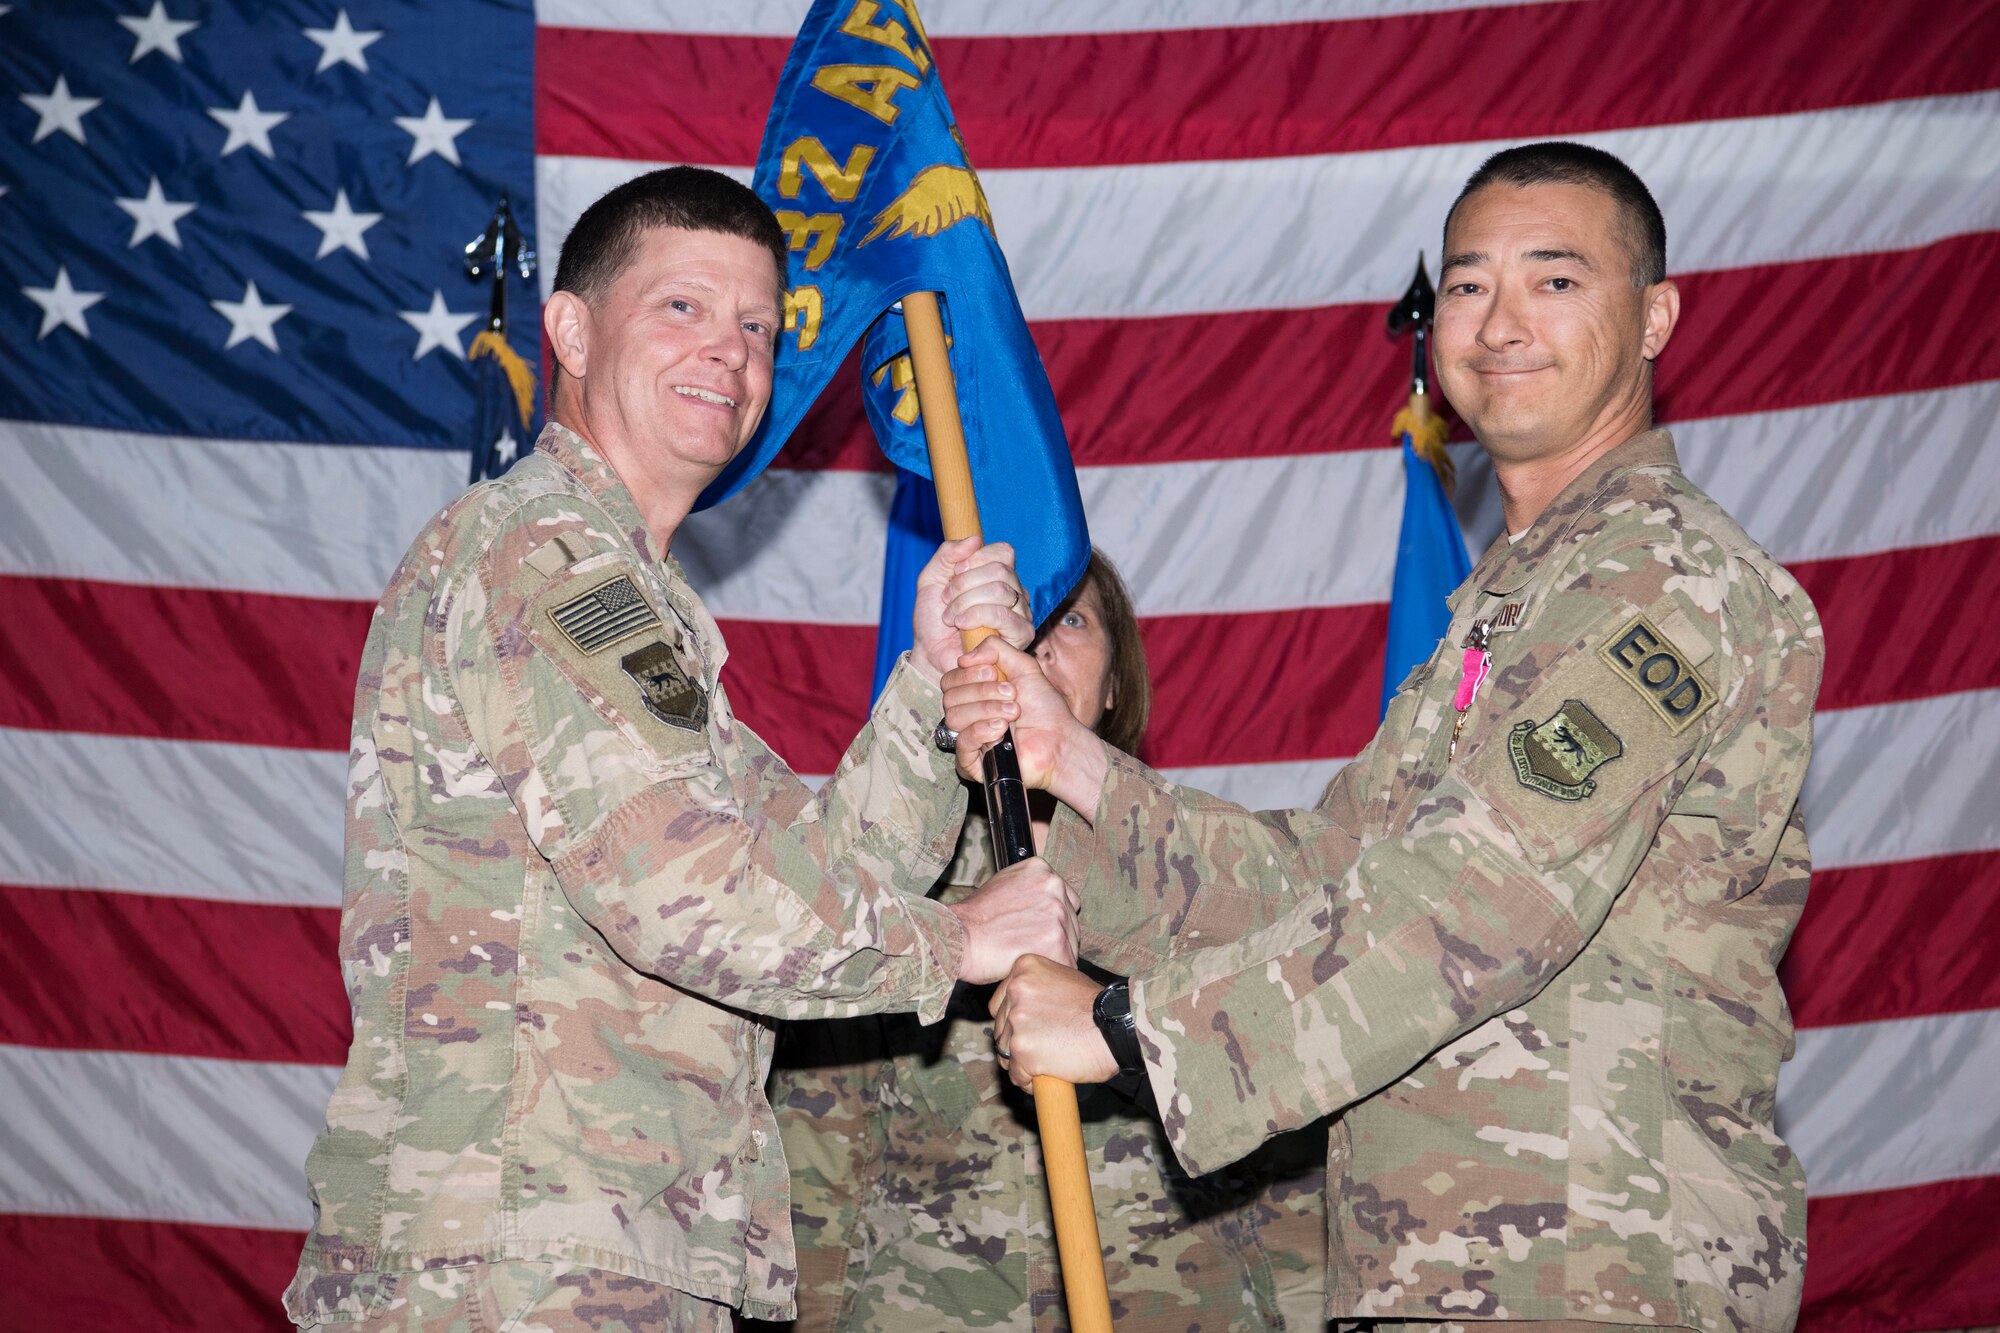 Brig. Gen. Kyle Robinson (left), 332nd Air Expeditionary Wing commander, takes the guidon from Col. Christopher Fuller, 332nd Expeditionary Mission Support Group commander, during the 332nd EMSG change of command, June 4, 2018, at an undisclosed location in Southwest Asia.